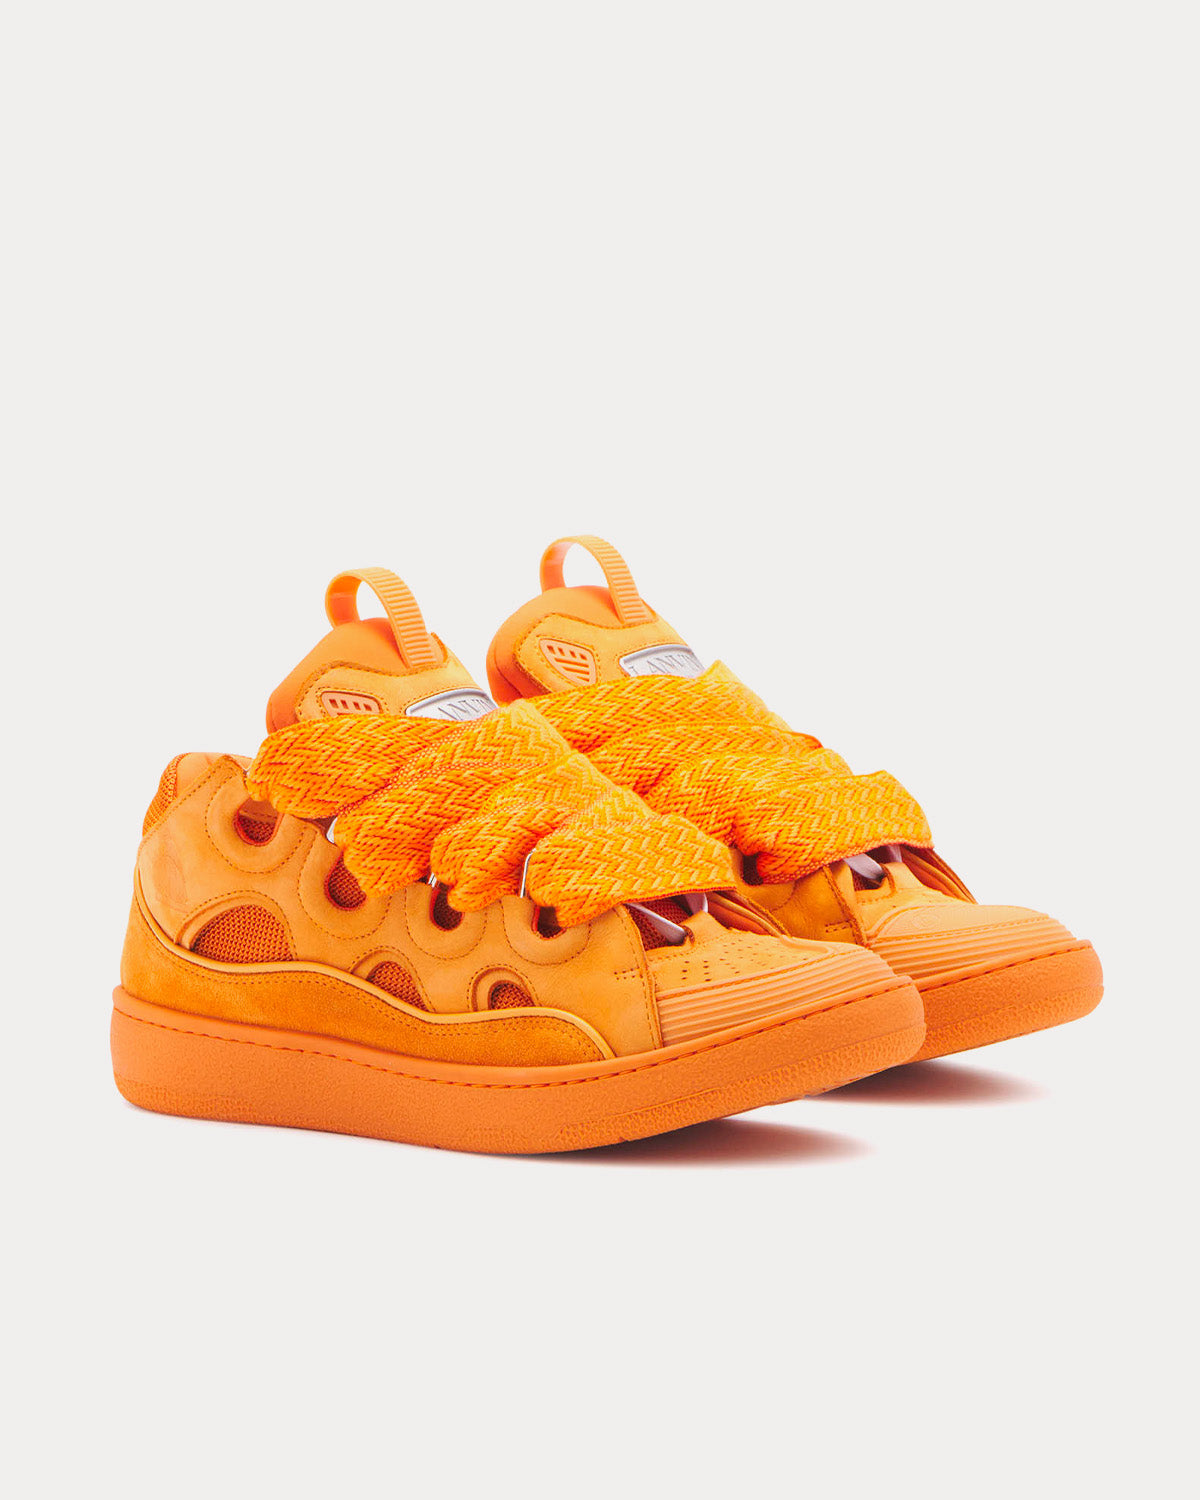 Lanvin - Curb Leather Mango Low Top Sneakers